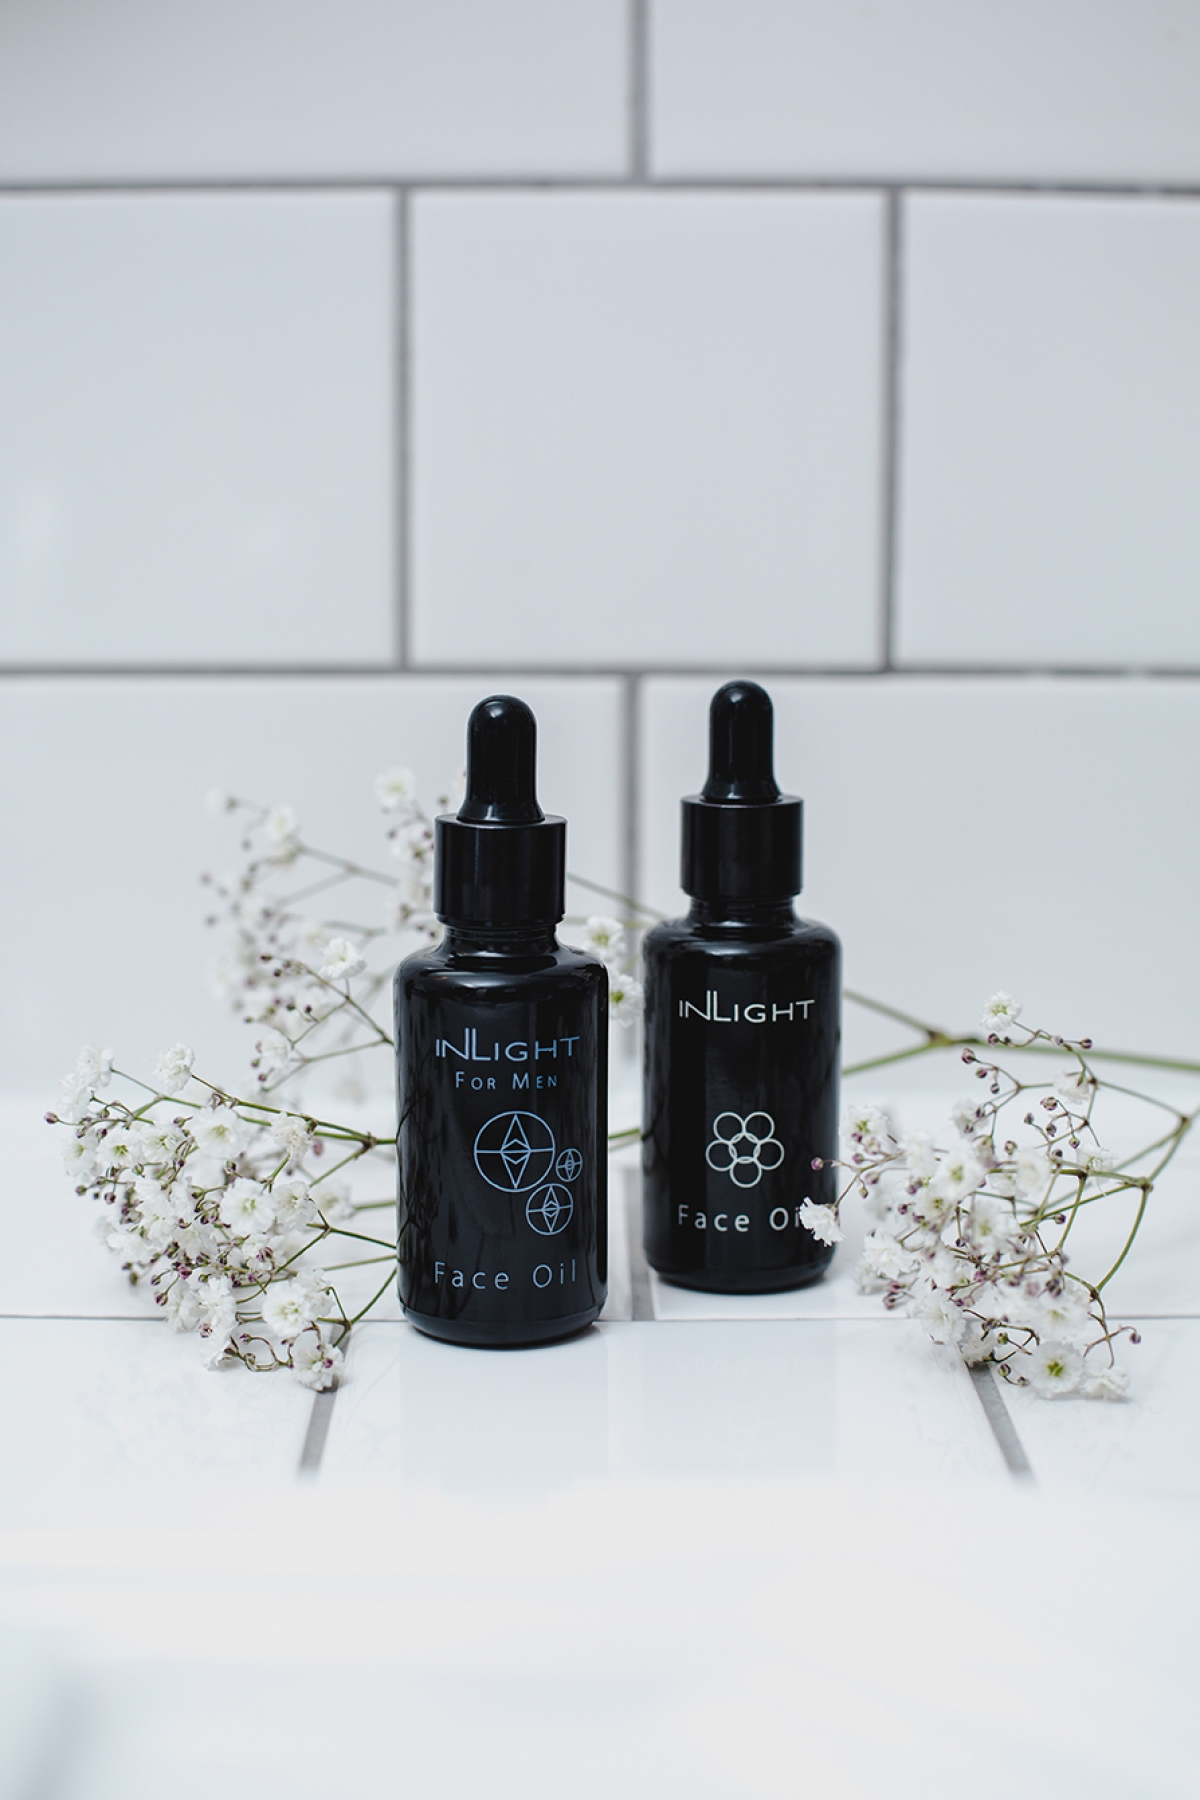 Win pampering facial oils from Inlight